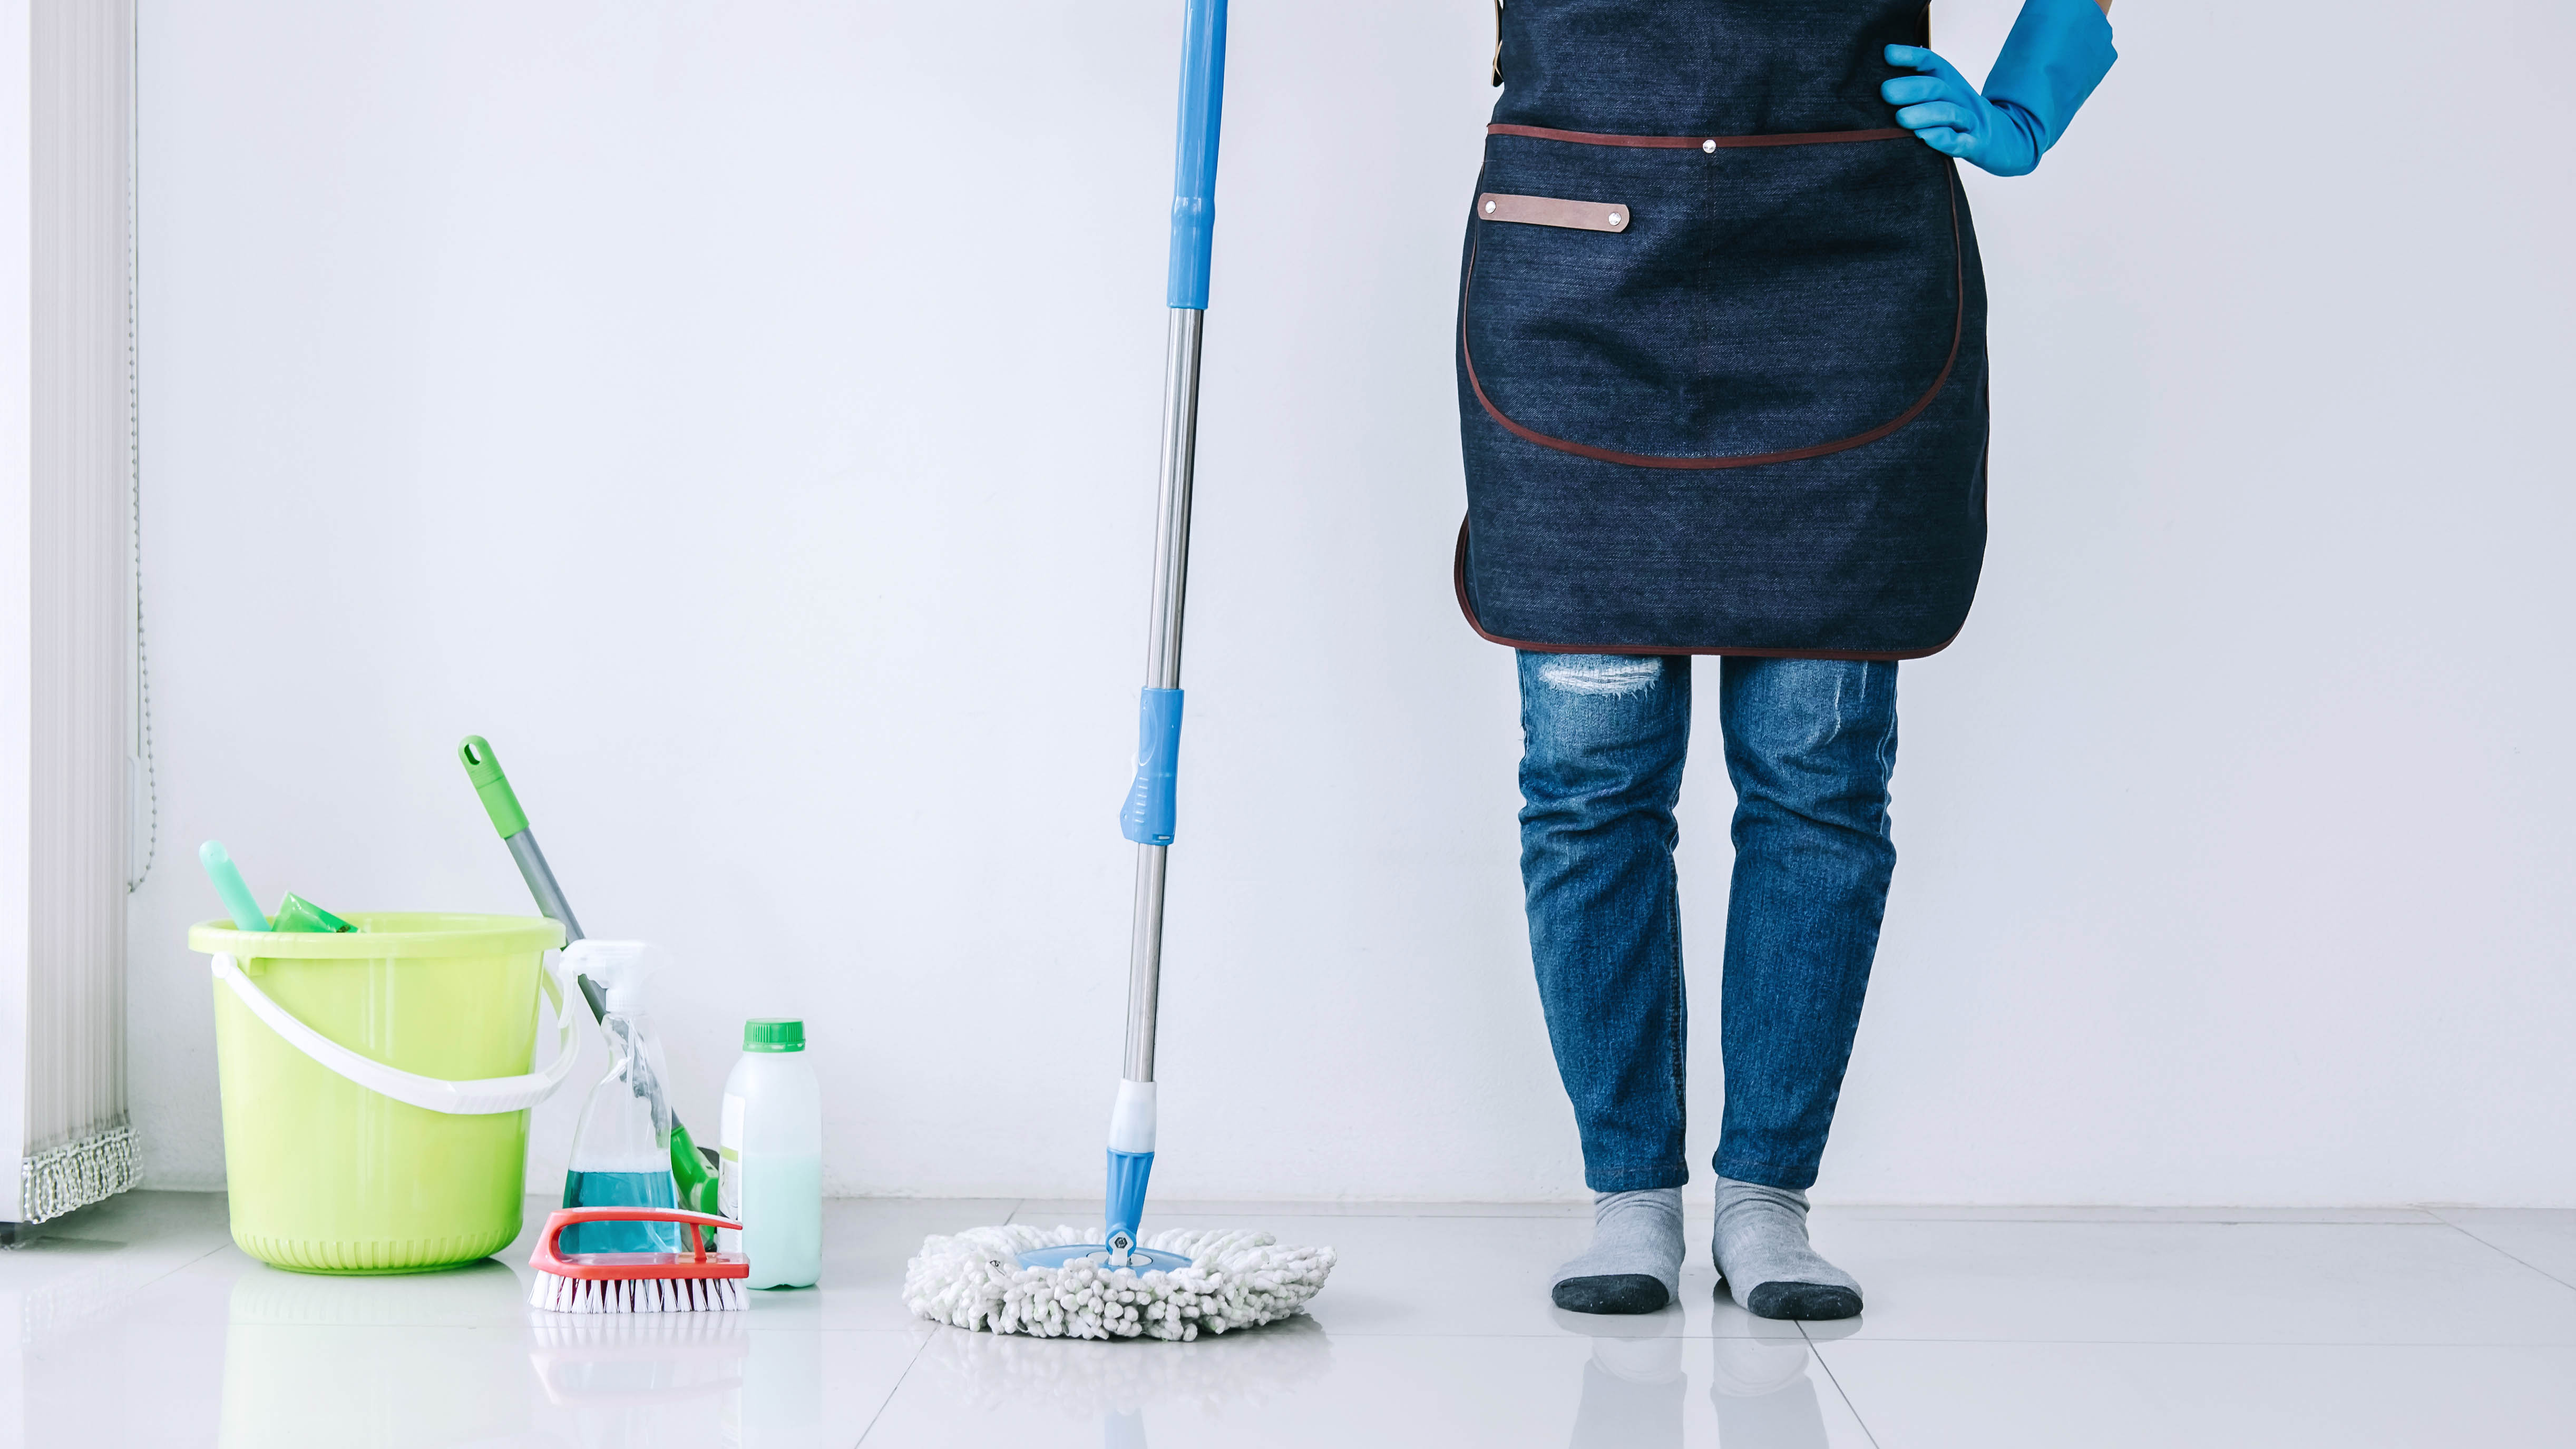 A professional cleaner next to a mop and bucket